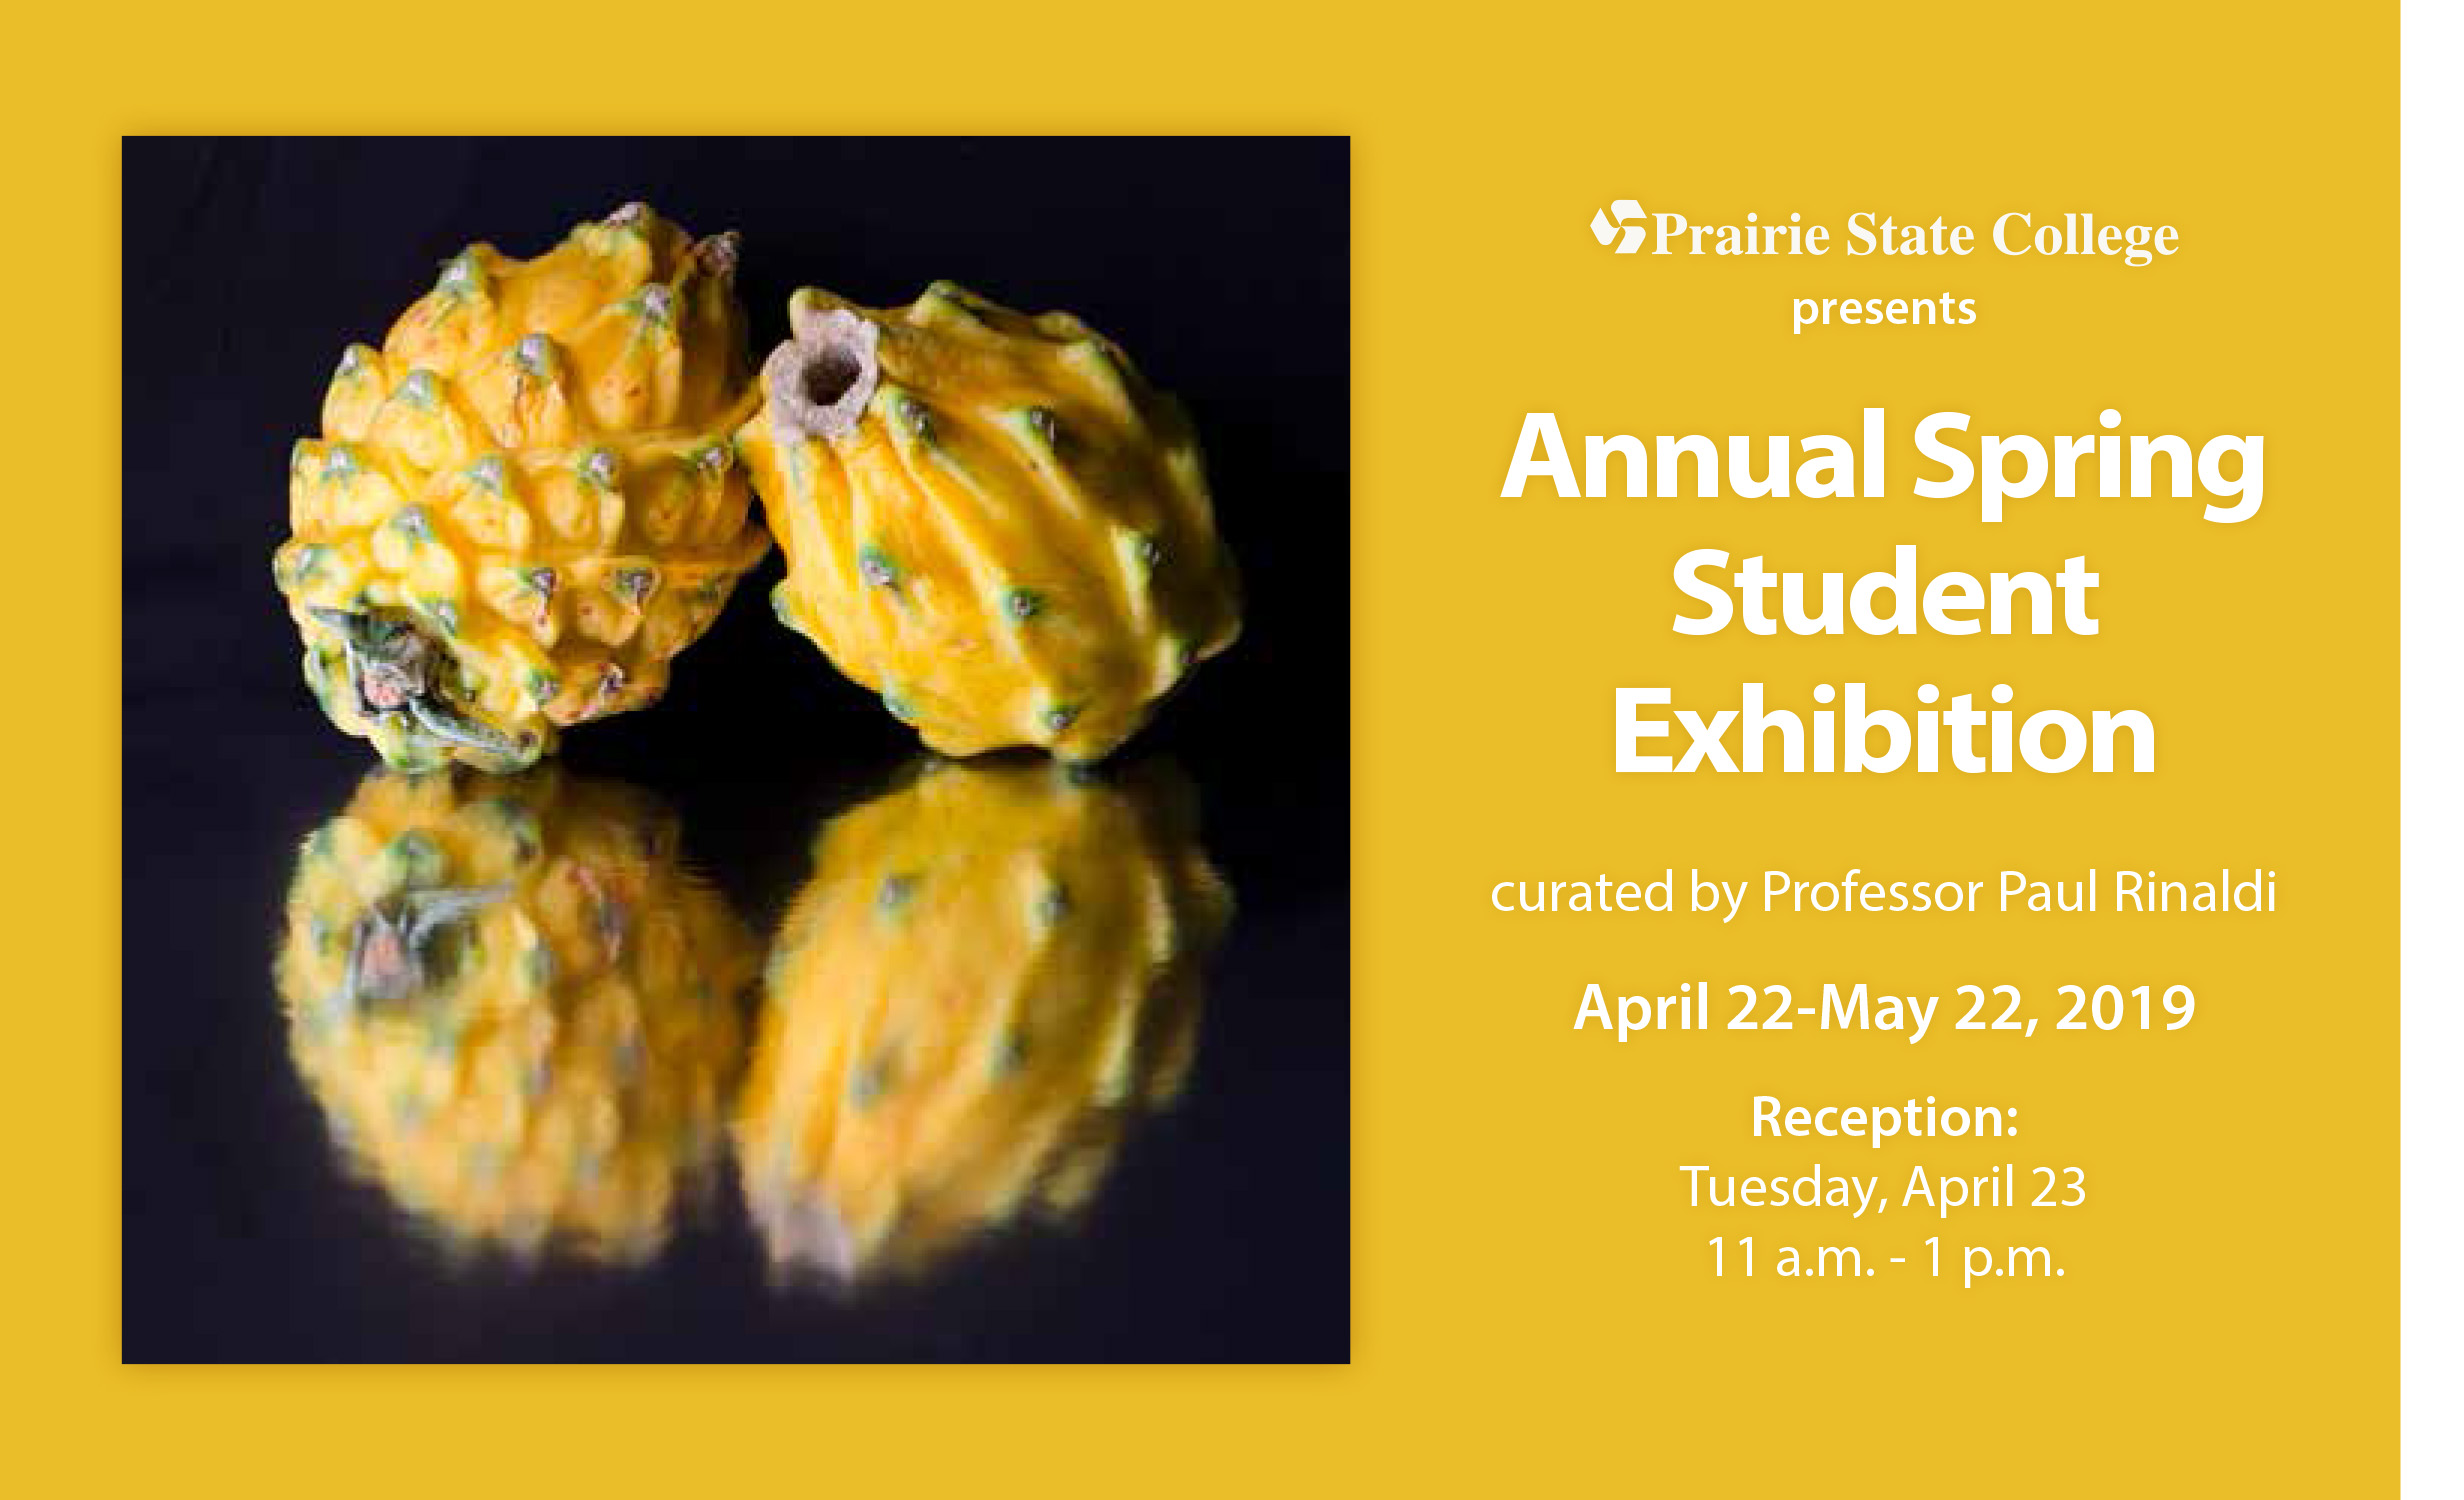 Annual Spring Student Exhibition postcard